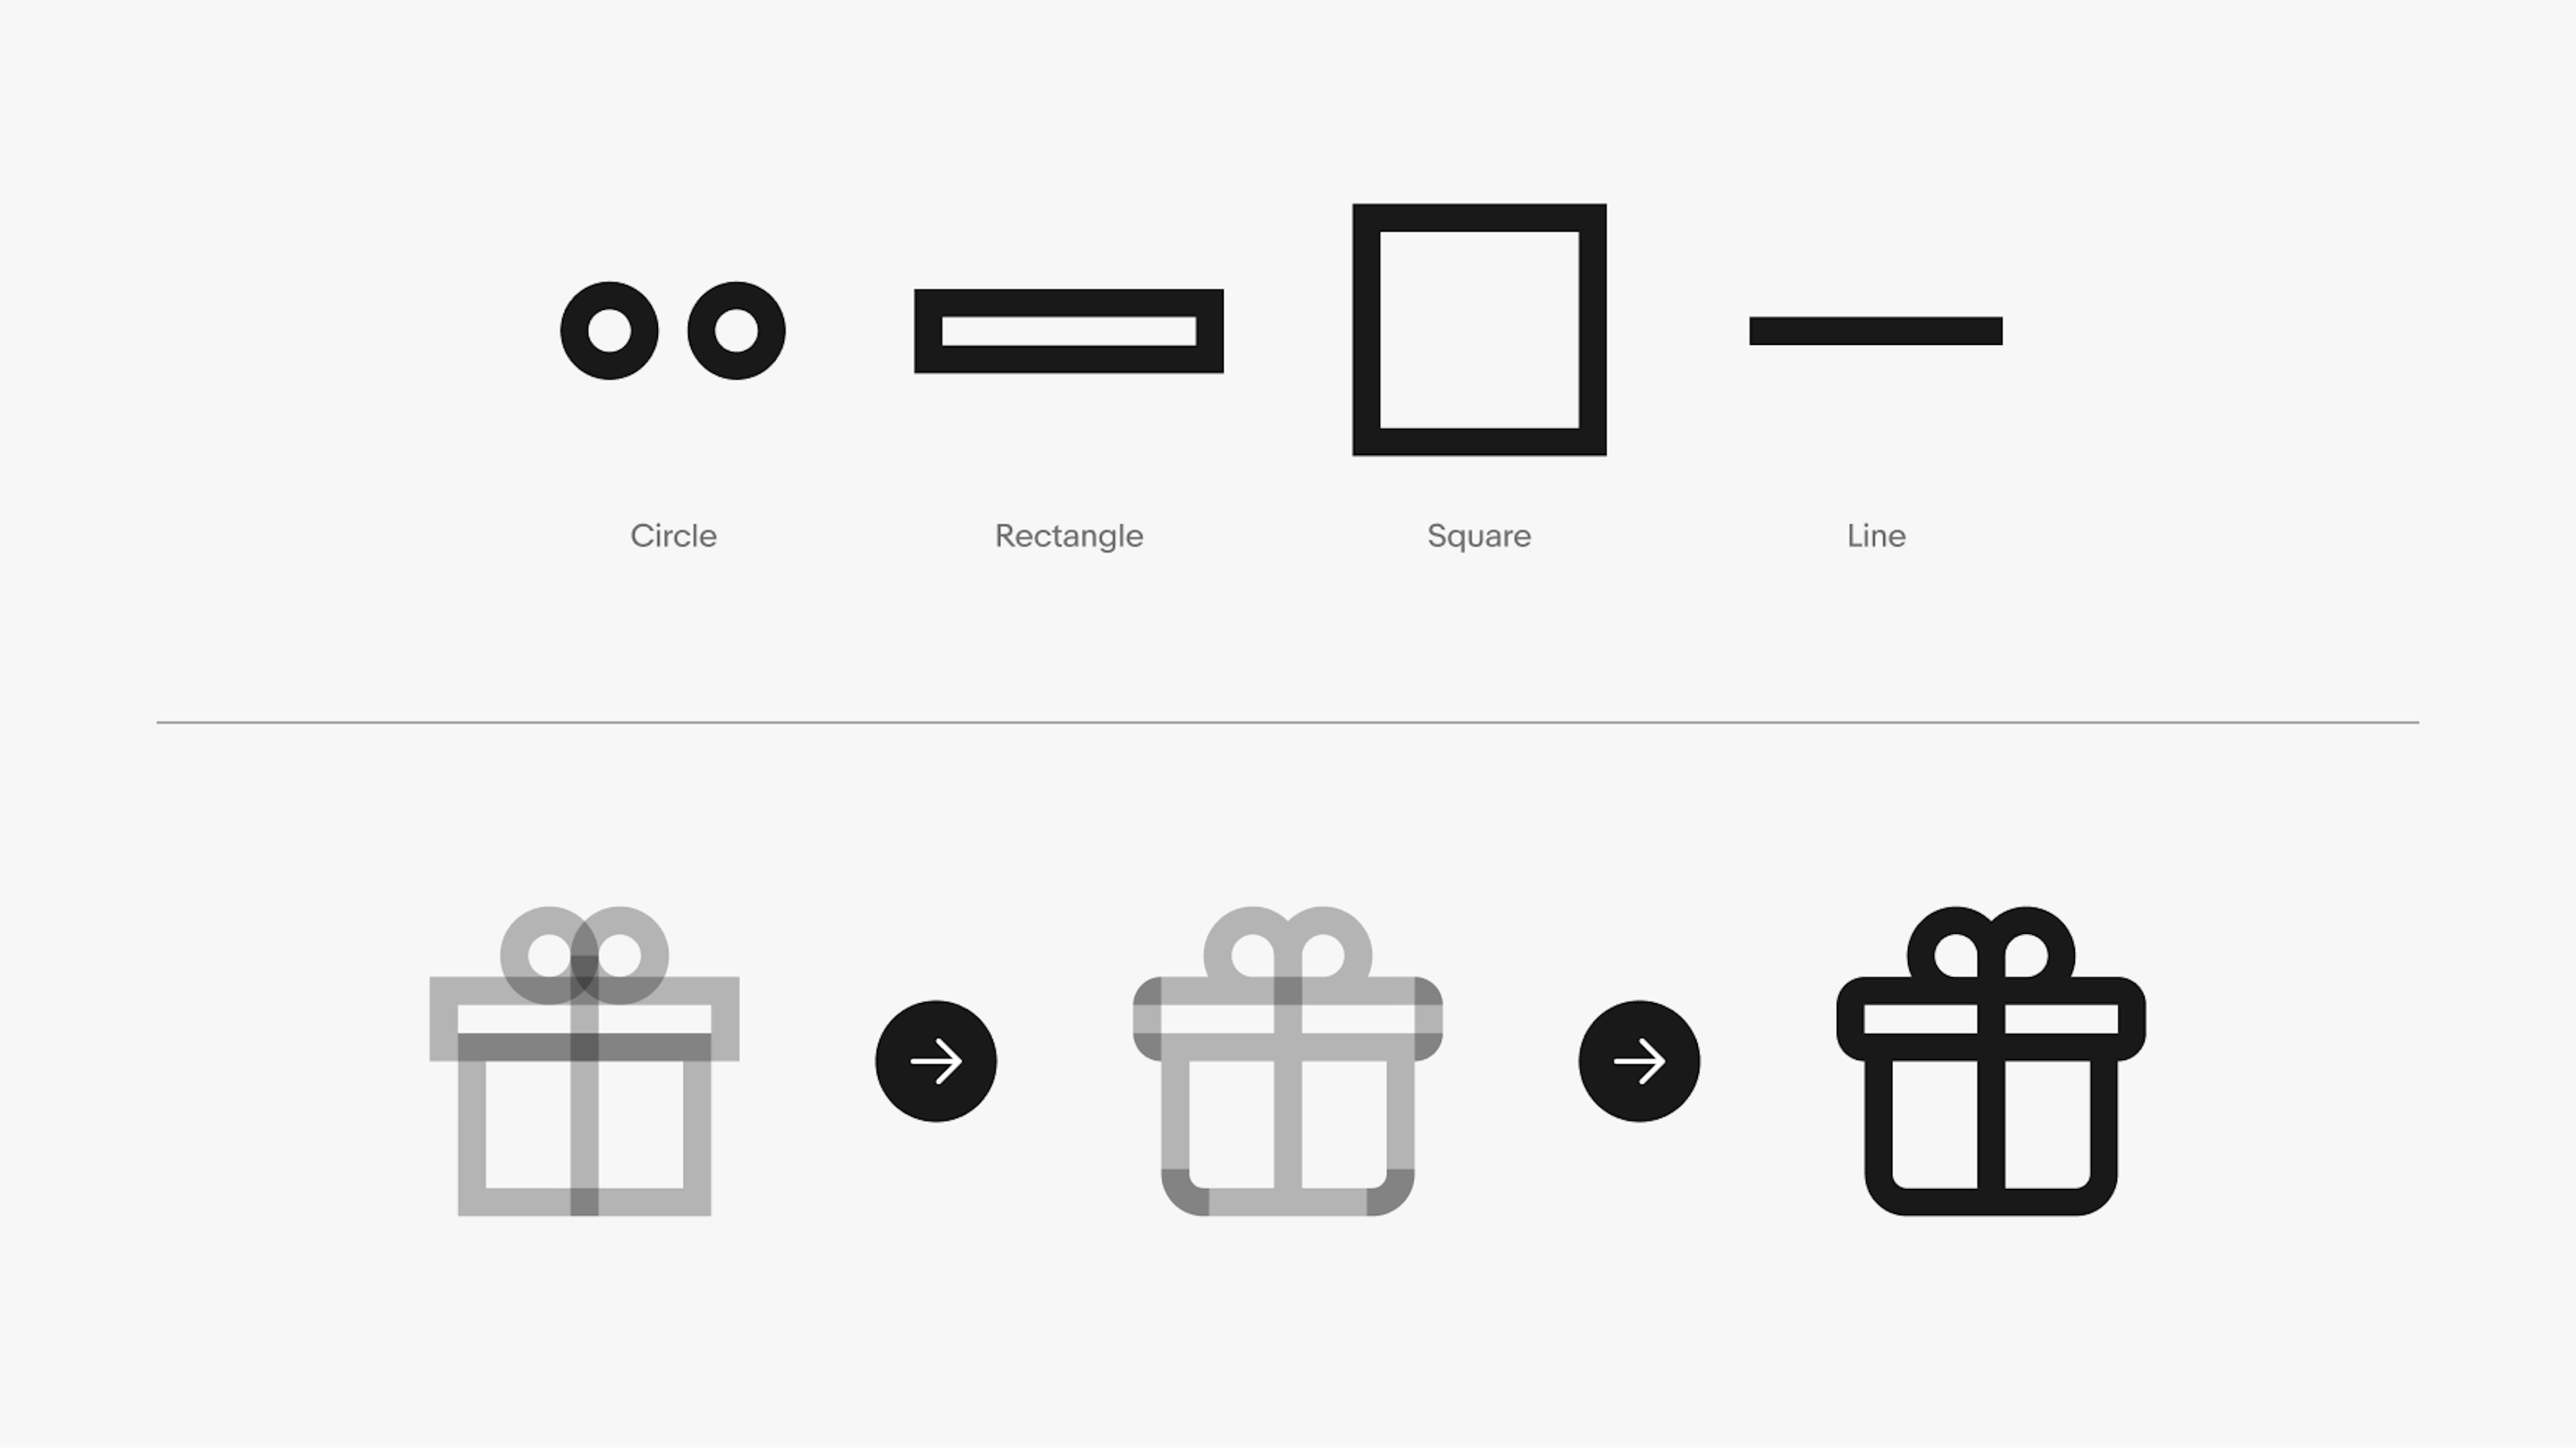 Two rows of graphics describing how to use simple shapes to create icons. The top row shows 2 circles, a rectangle, a square, and a line. The bottom row shows the shapes assembled to create a rigid gift box icon in step 1. The next step shows how the corners are rounded and the circles are adjusted. The final step shows the final constructed gift icon.